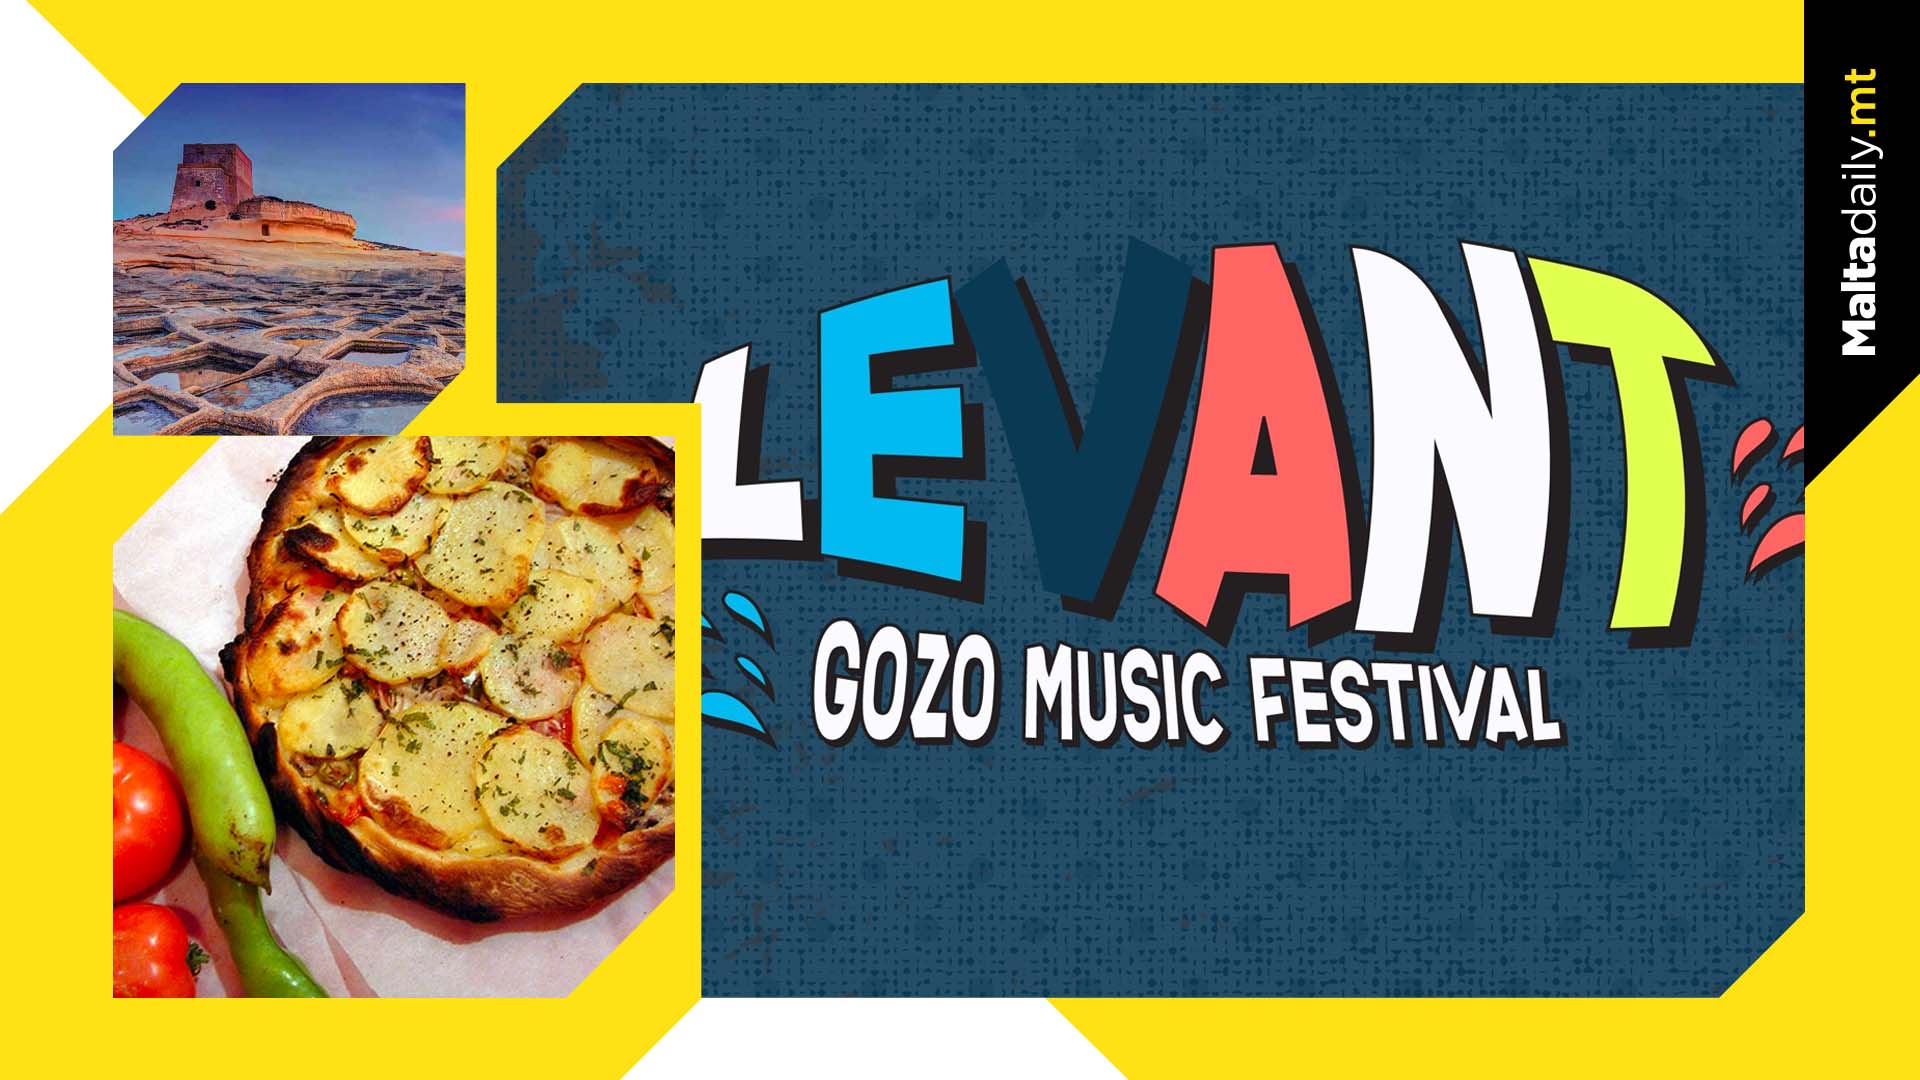 An Eclectic Music Festival: Reasons To Visit Gozo This September